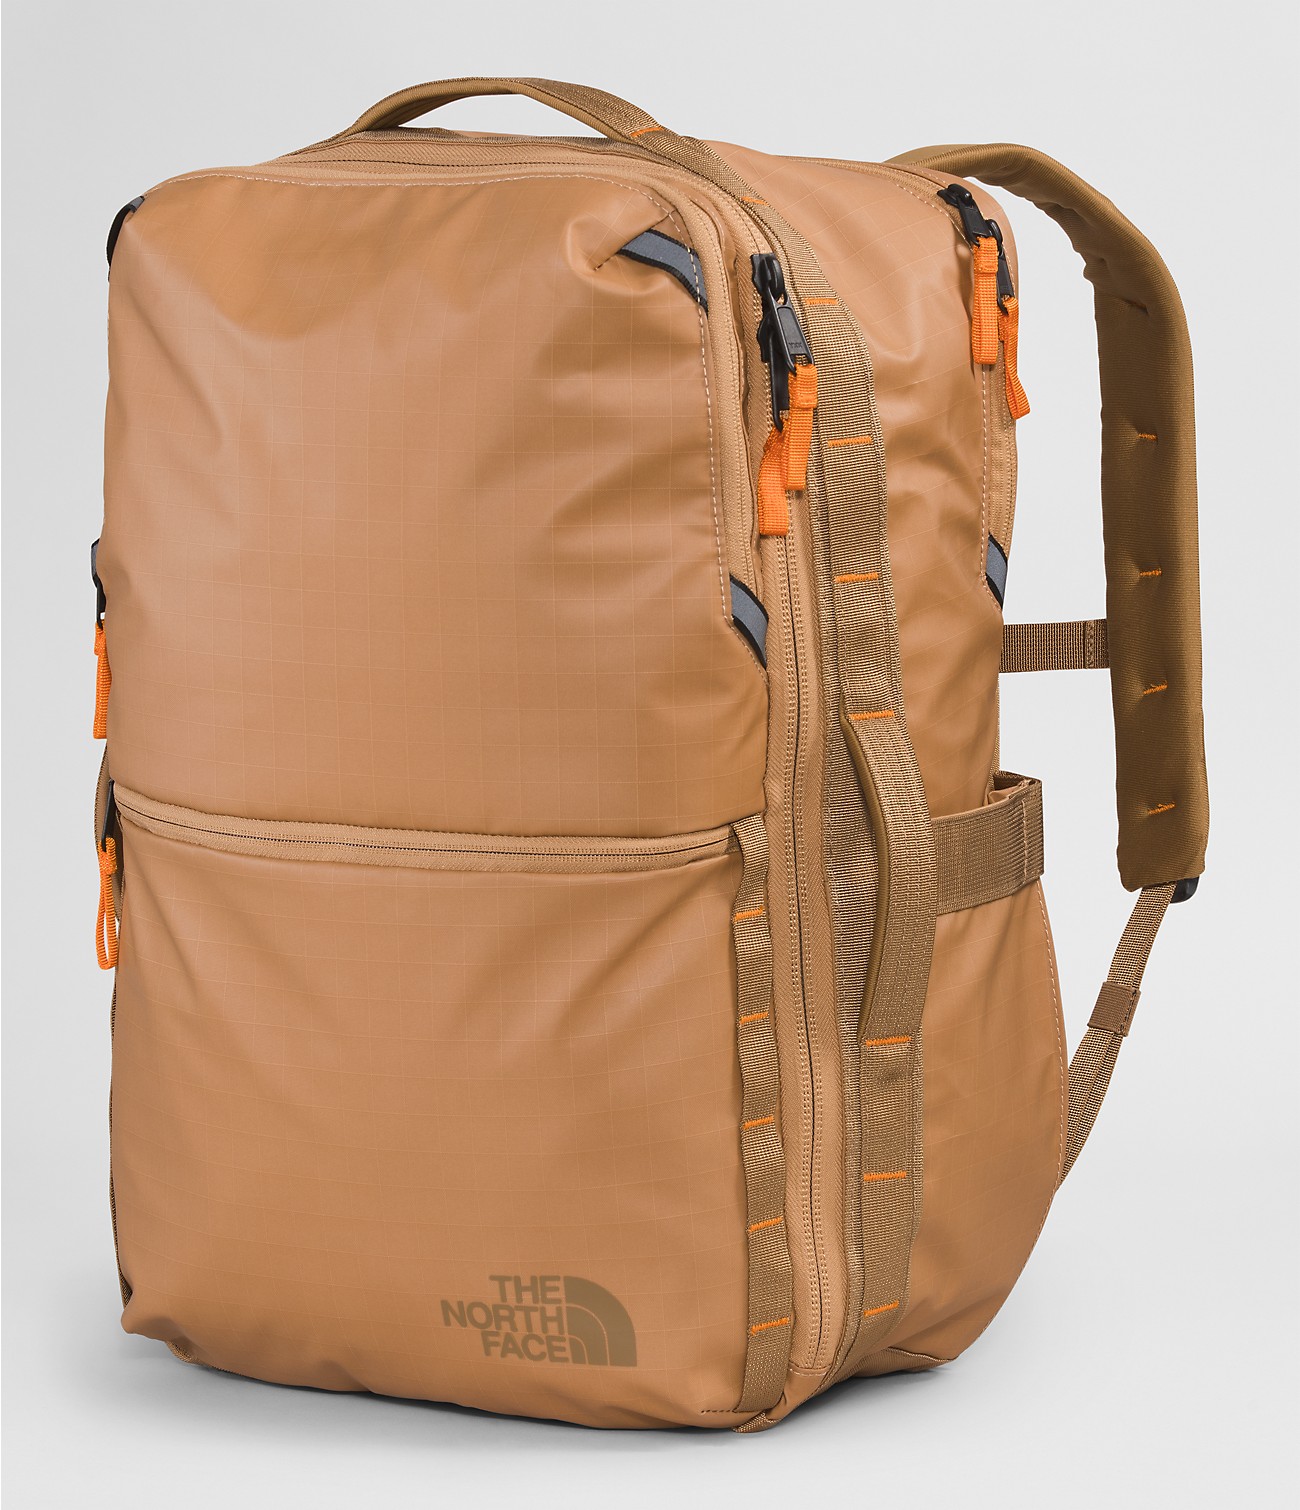 Unlock Wilderness' choice in the Thule Vs North Face comparison, the Base Camp Voyager Travel Pack by The North Face